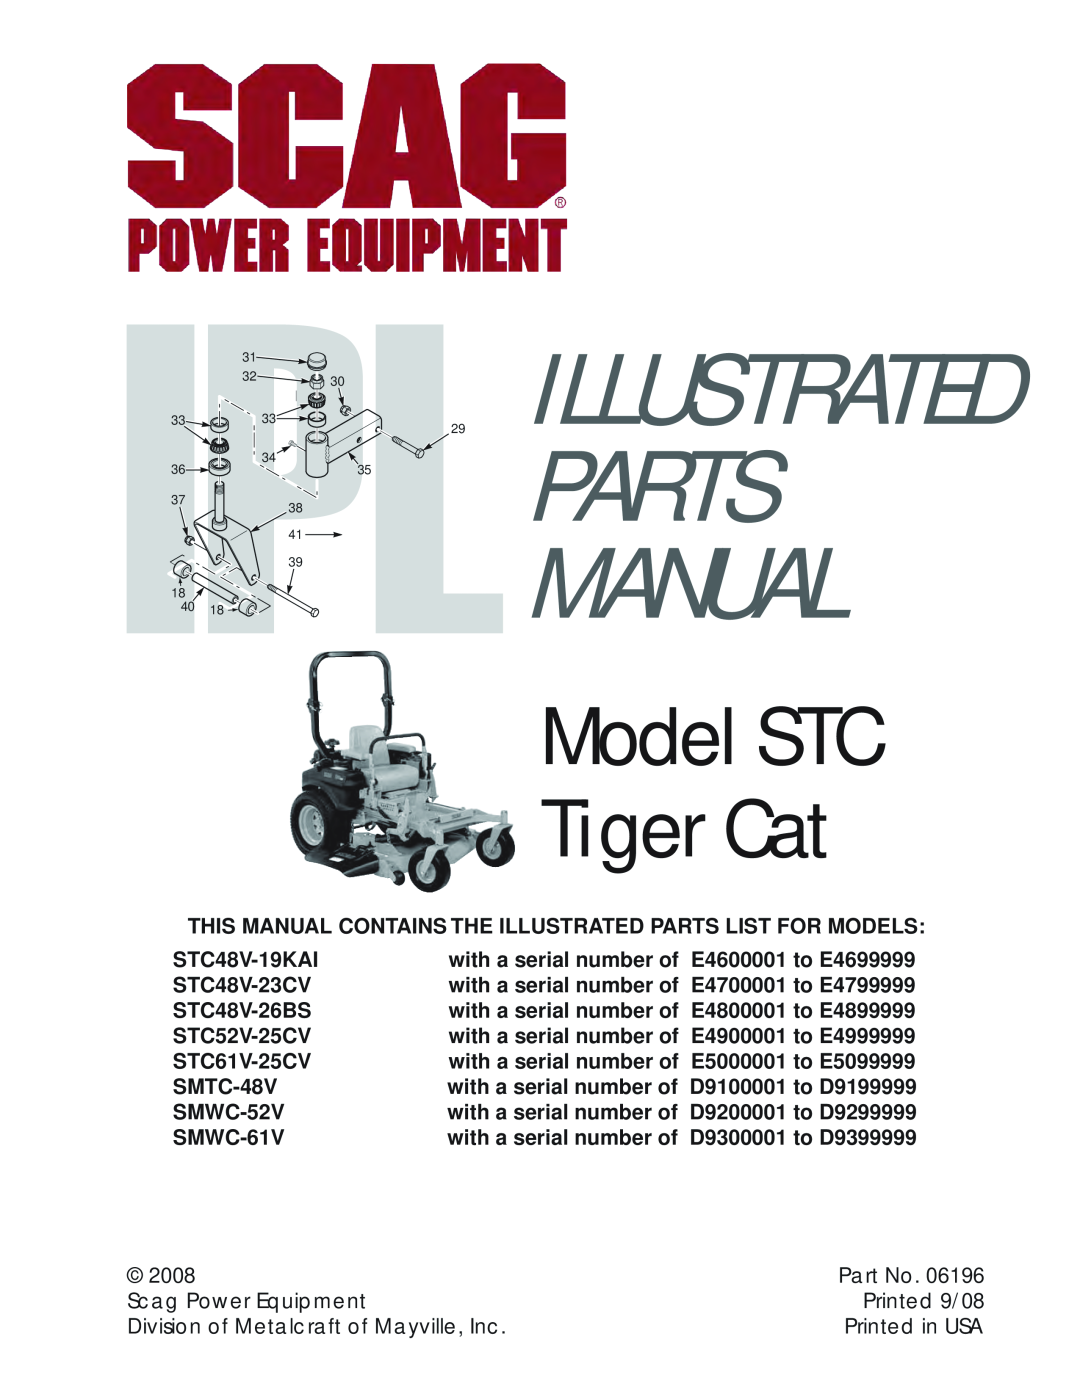 Scag Power Equipment SMWC-52V manual This manual contains the illustrated parts list for MODELS, Illustrated Parts Manual 